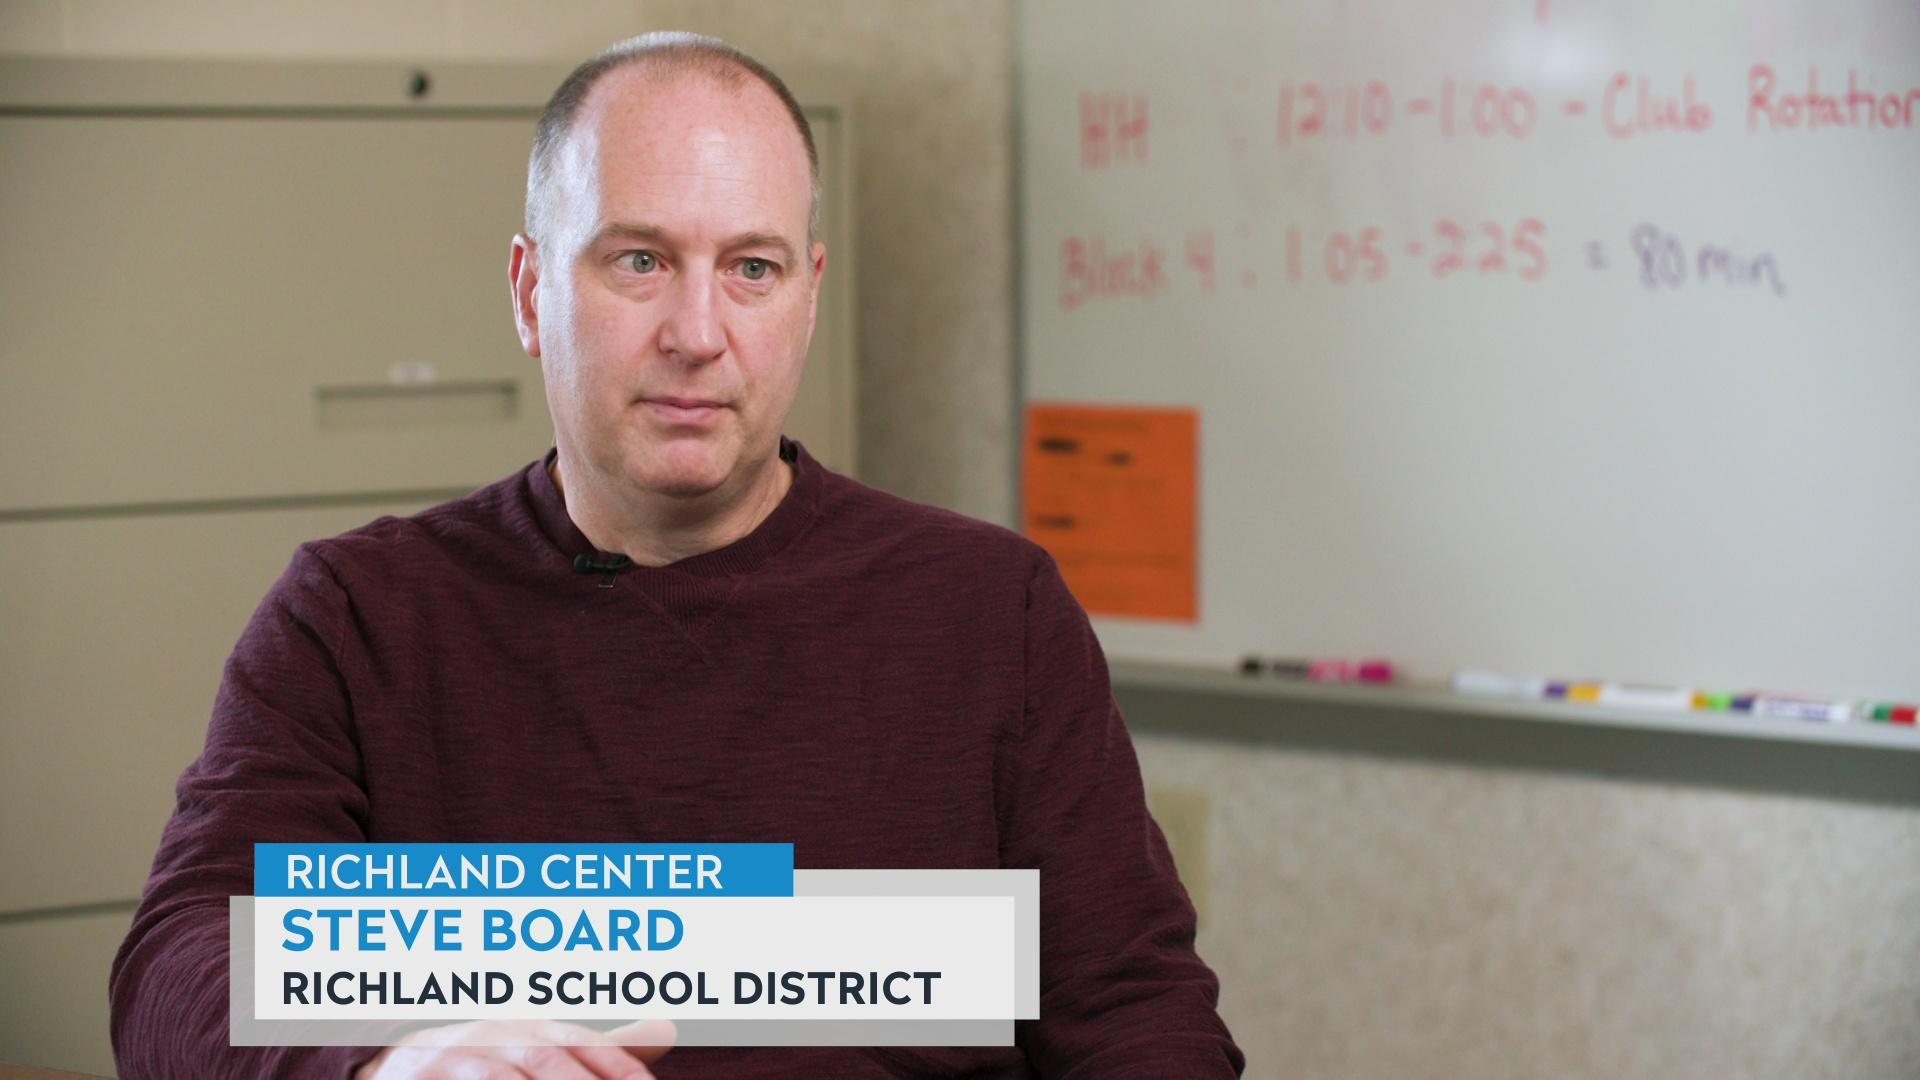 Steve Board on the Richland School District and defeasance